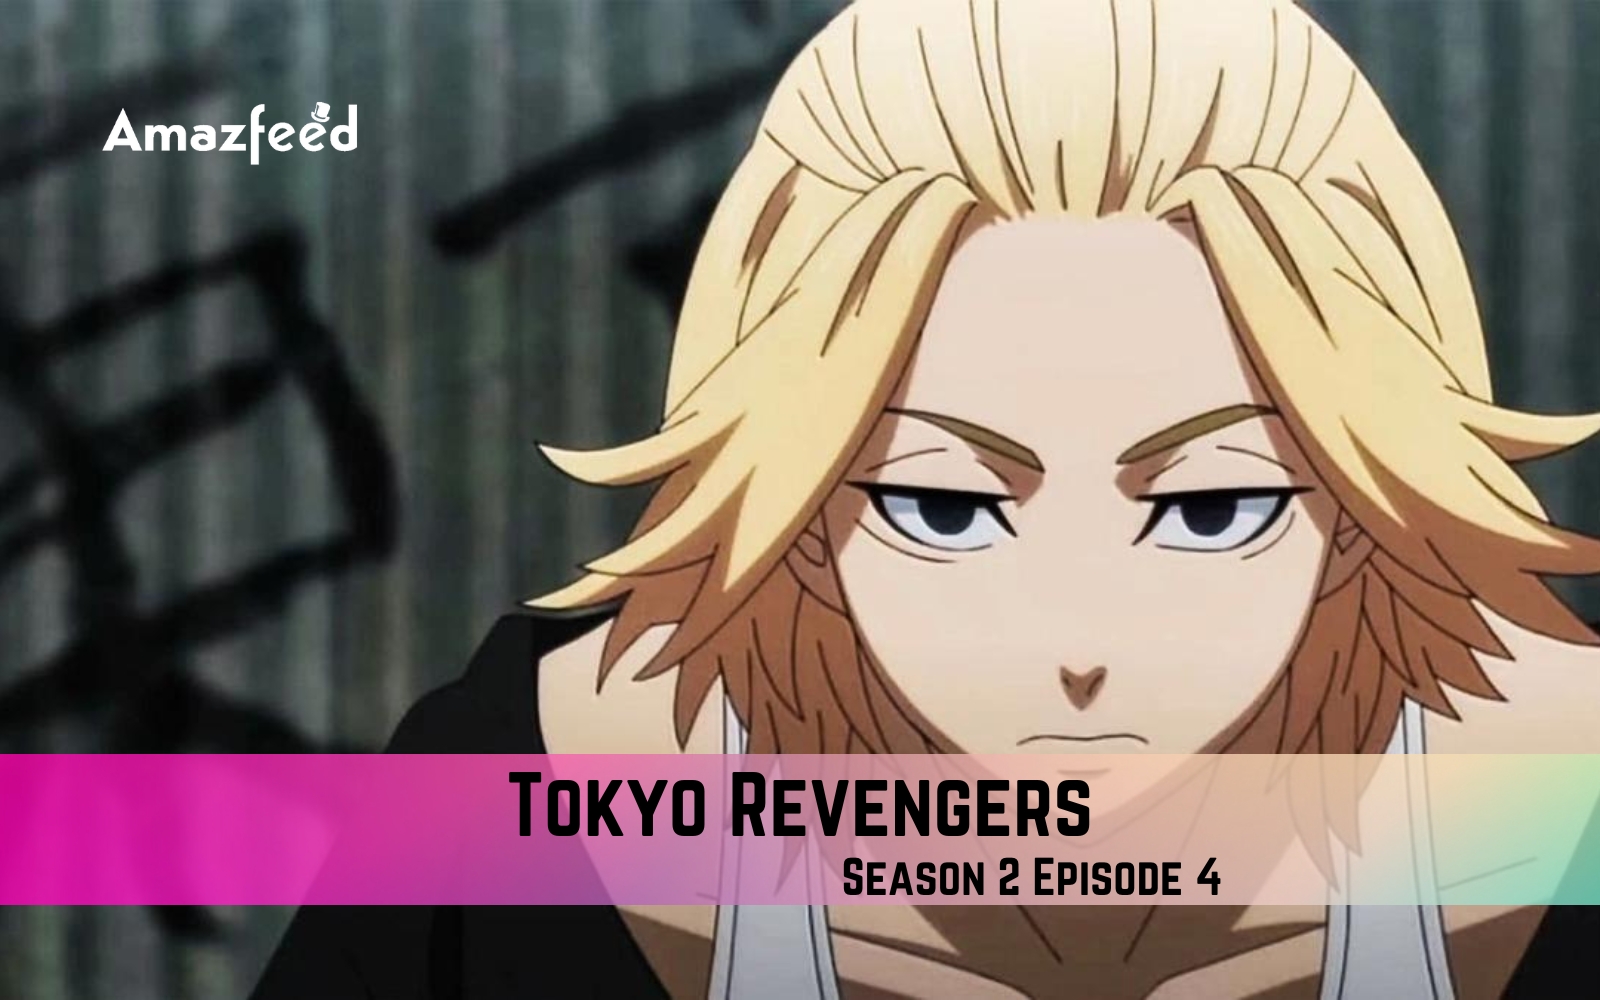 Tokyo Revengers season 2 episode 4 release date and time, where to watch,  what to expect, and more